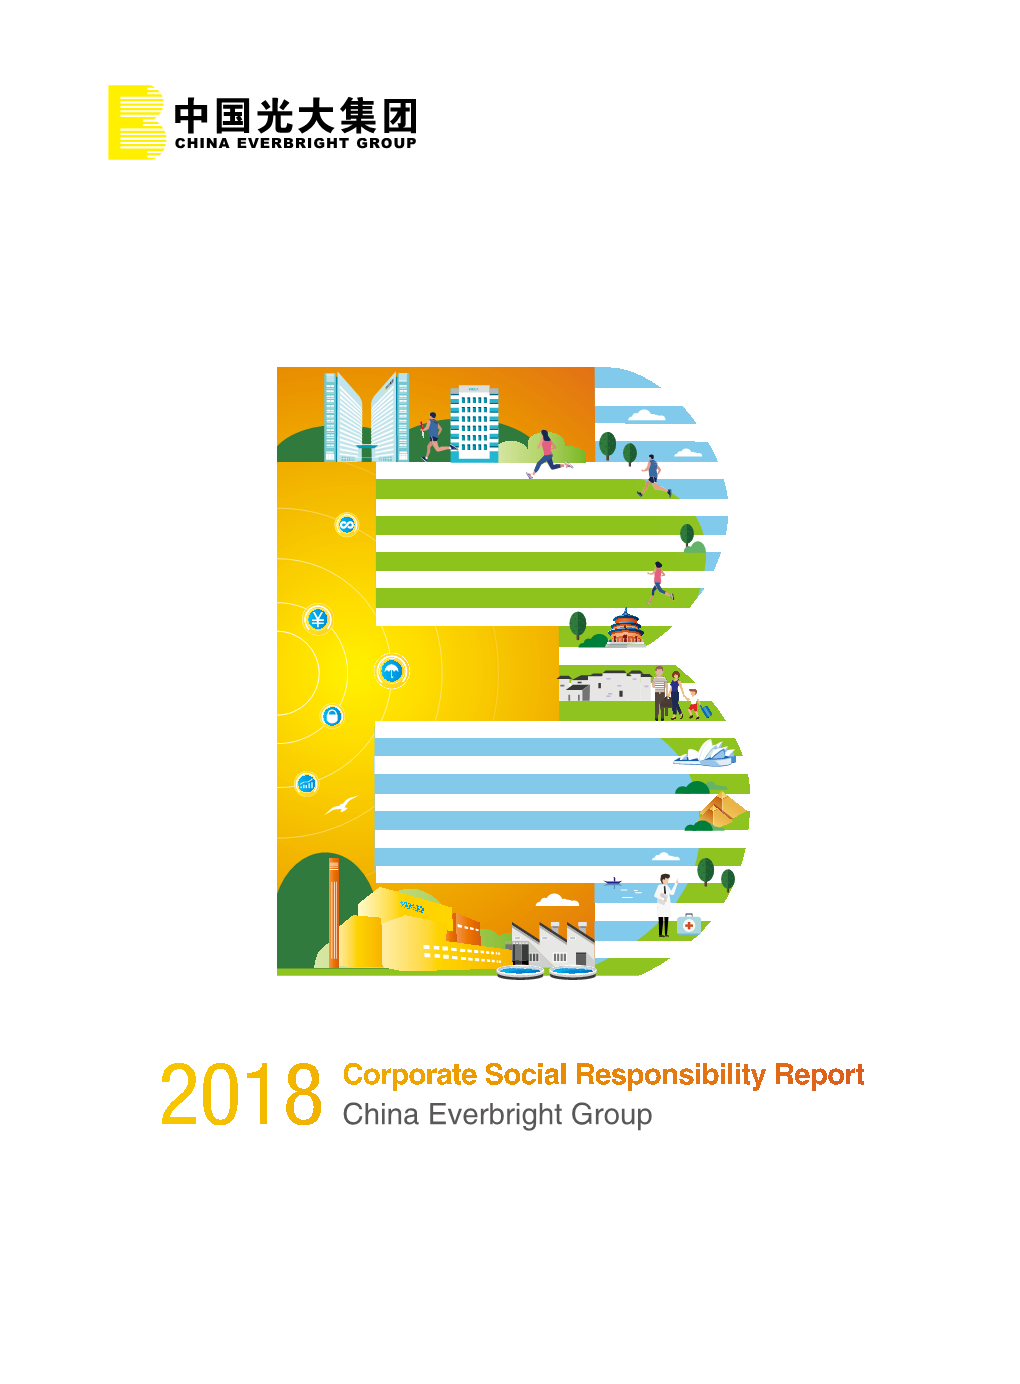 China Everbright Group